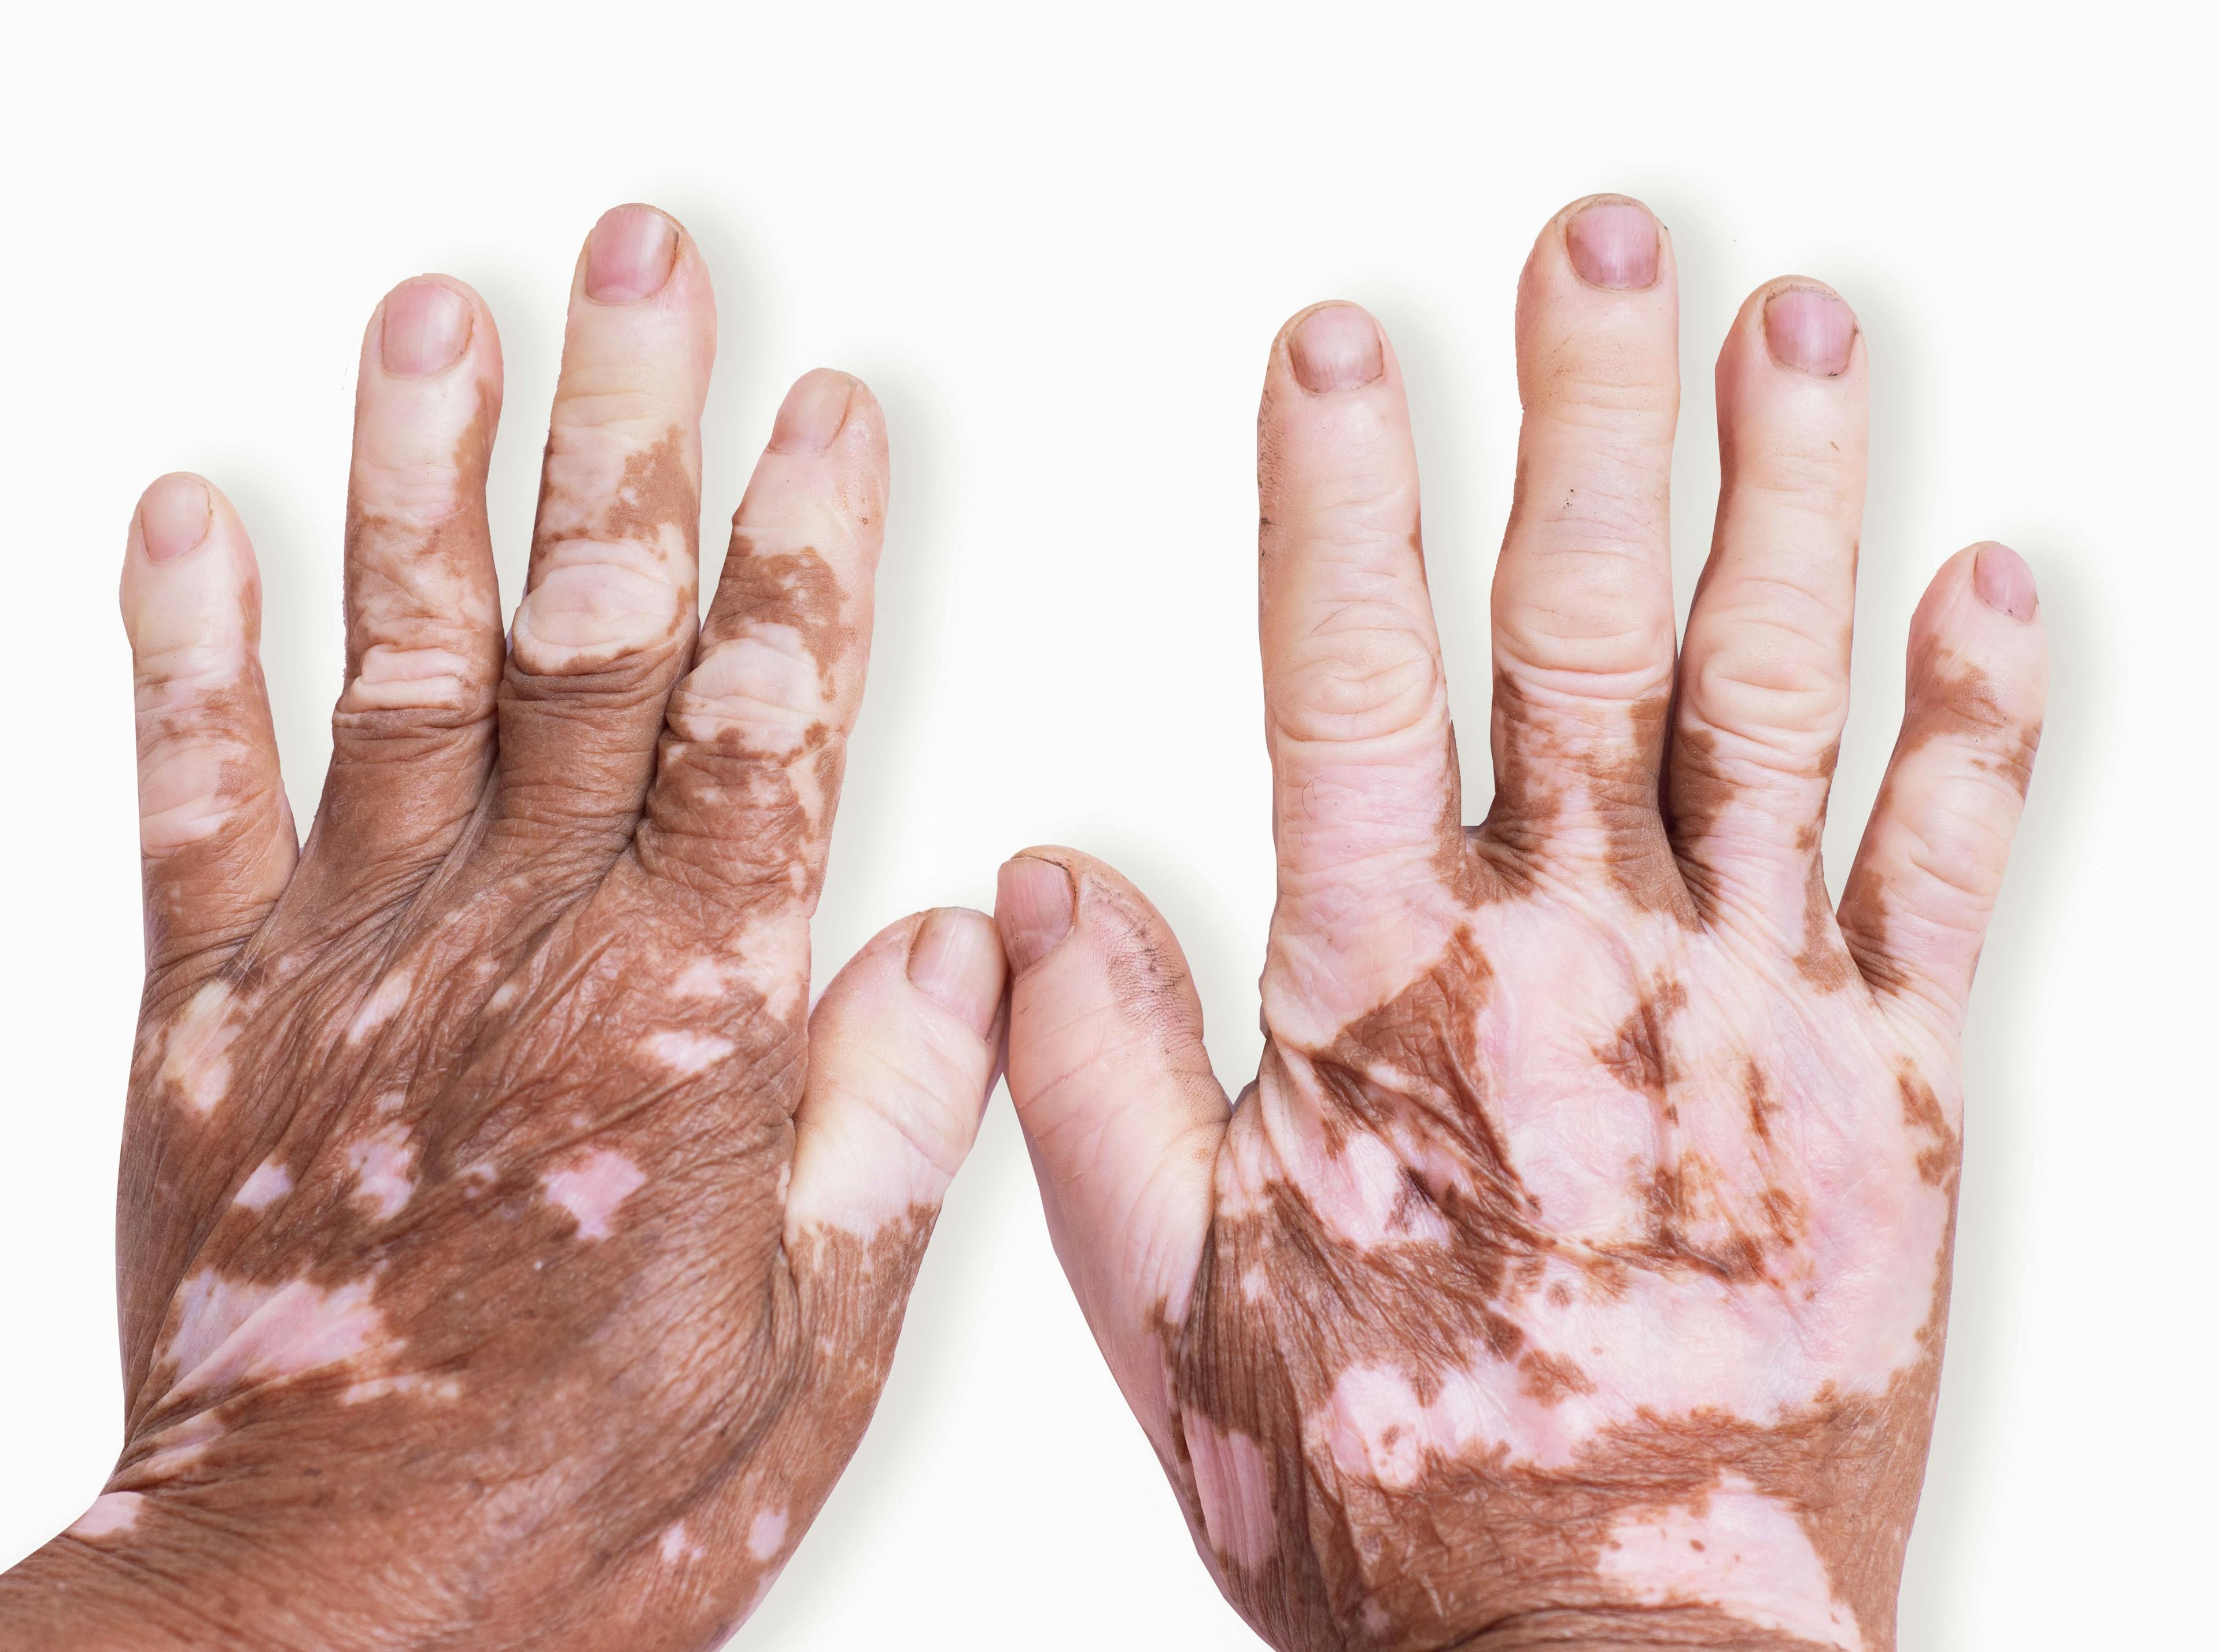 High Proportion of Patients With Vitiligo in the US Do Not Receive Treatment, Study Says